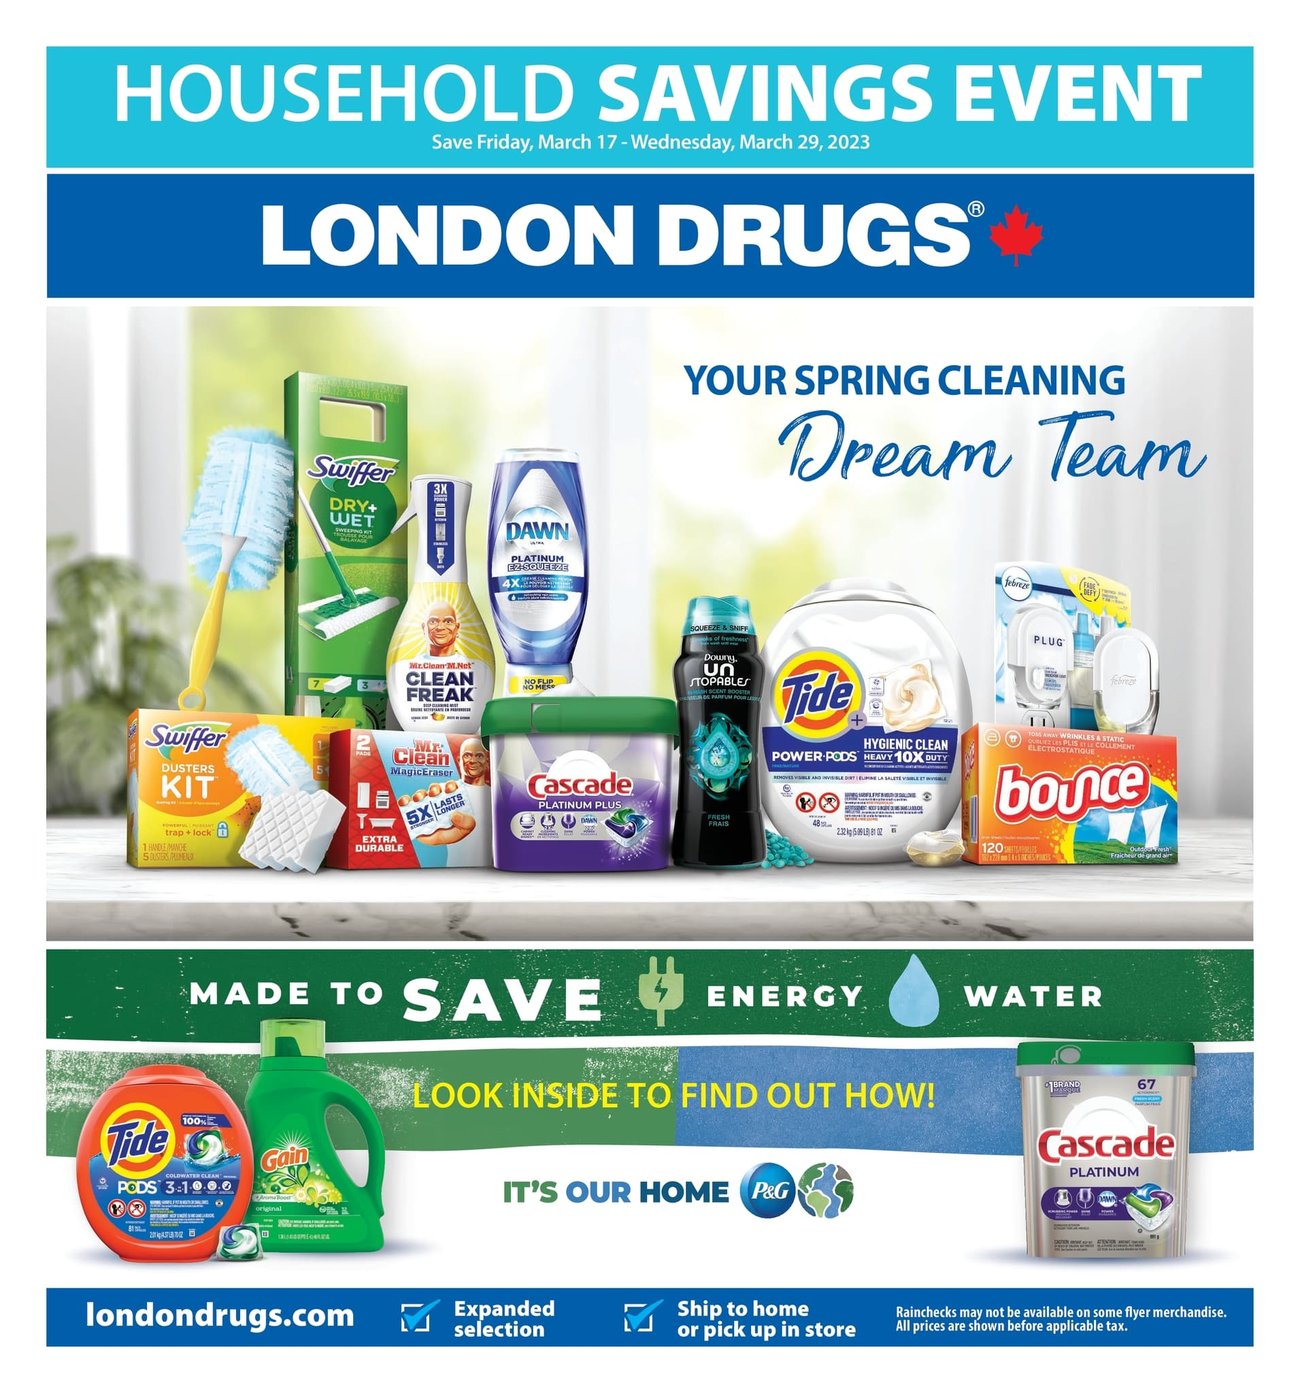 London Drugs - Household Savings Event - Page 1